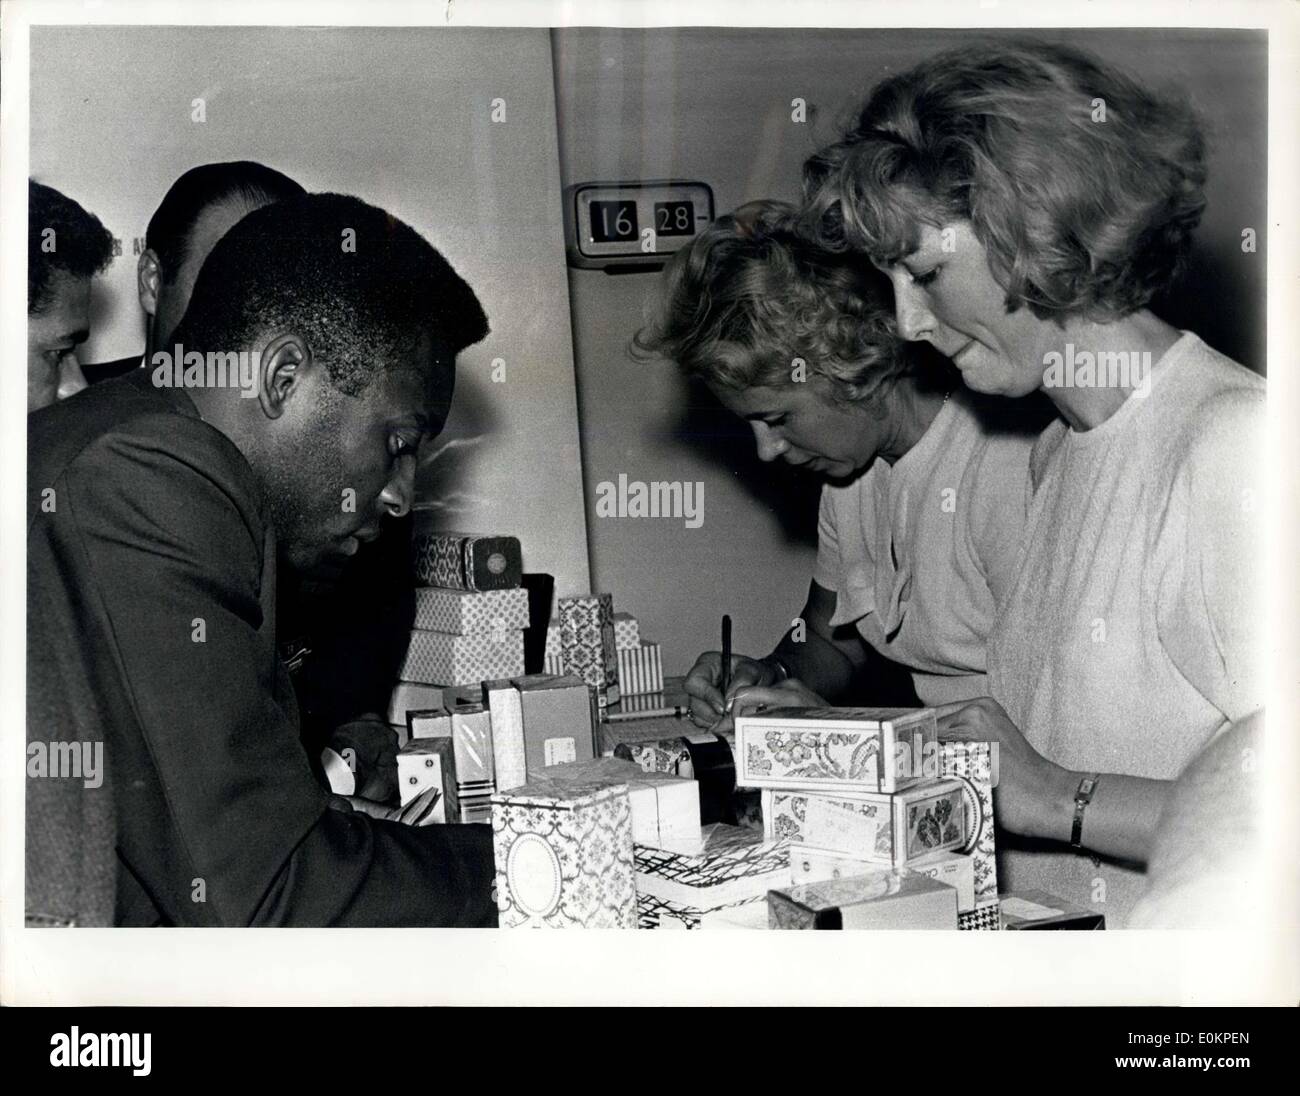 Jul. 24, 1944 - Brazilians Delayed: Brazilian soccer star Pele buying gifts at London Airport this evening as the Brazilian team awaited the arrival of their airplane to take them home to Brazil today, July 24. The Departure of the plane was delayed for hours ad the Brazilians are expected to leae L Later in the Afternoon. Stock Photo